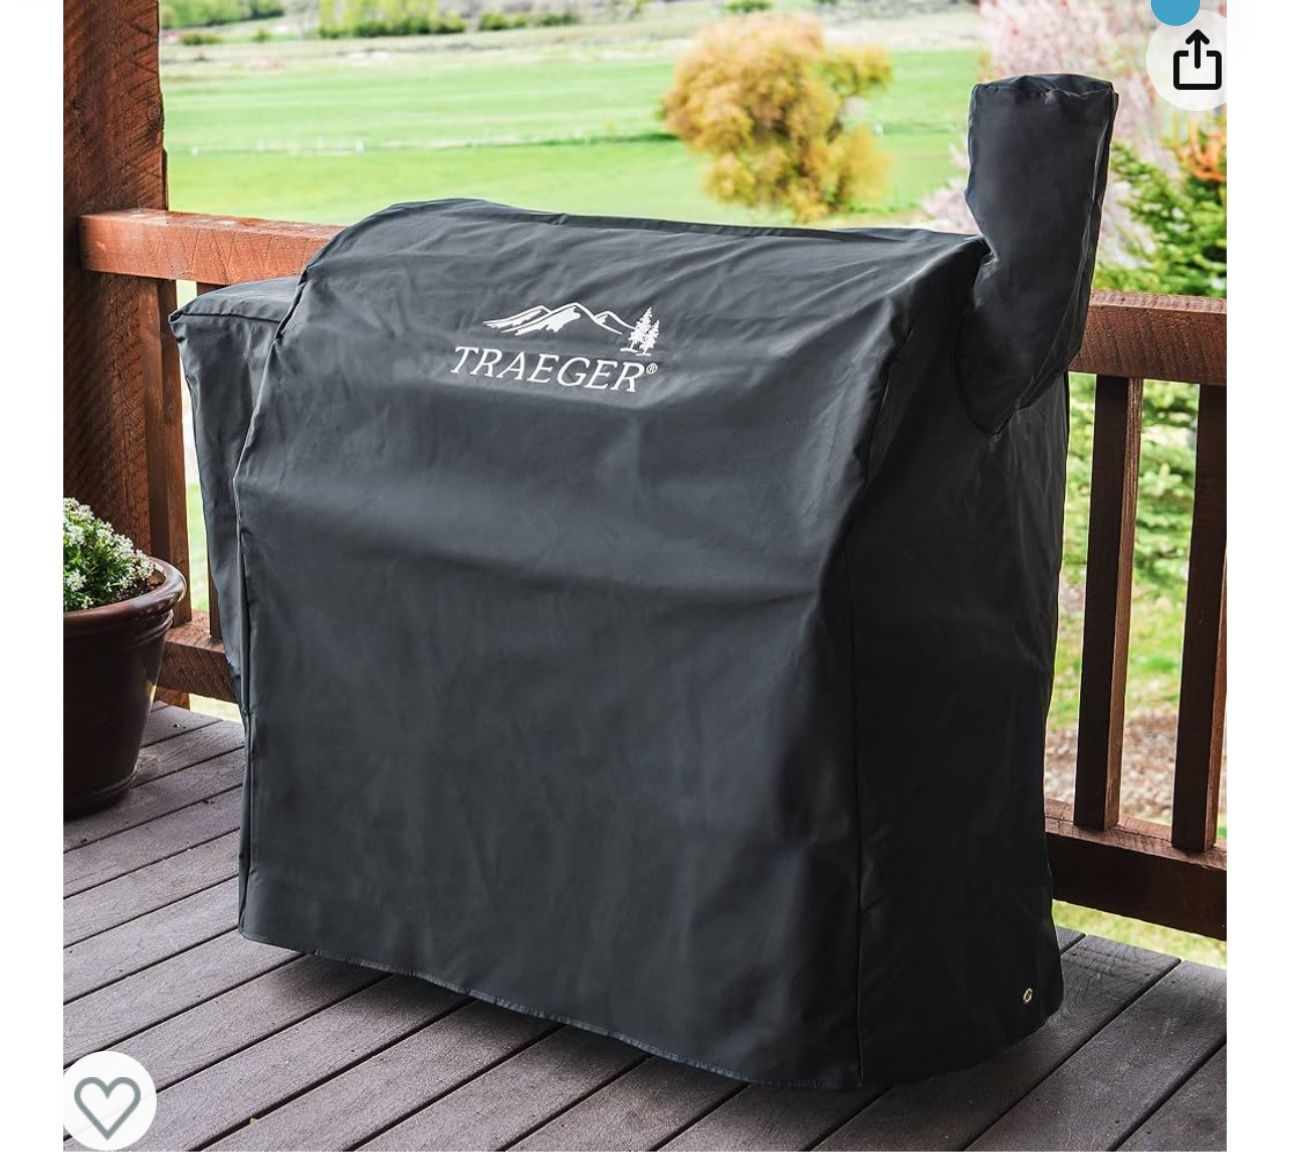 Traeger Full-Length Grill Cover - Pro 34, 11.5 x 4.5 x 10.5 inches